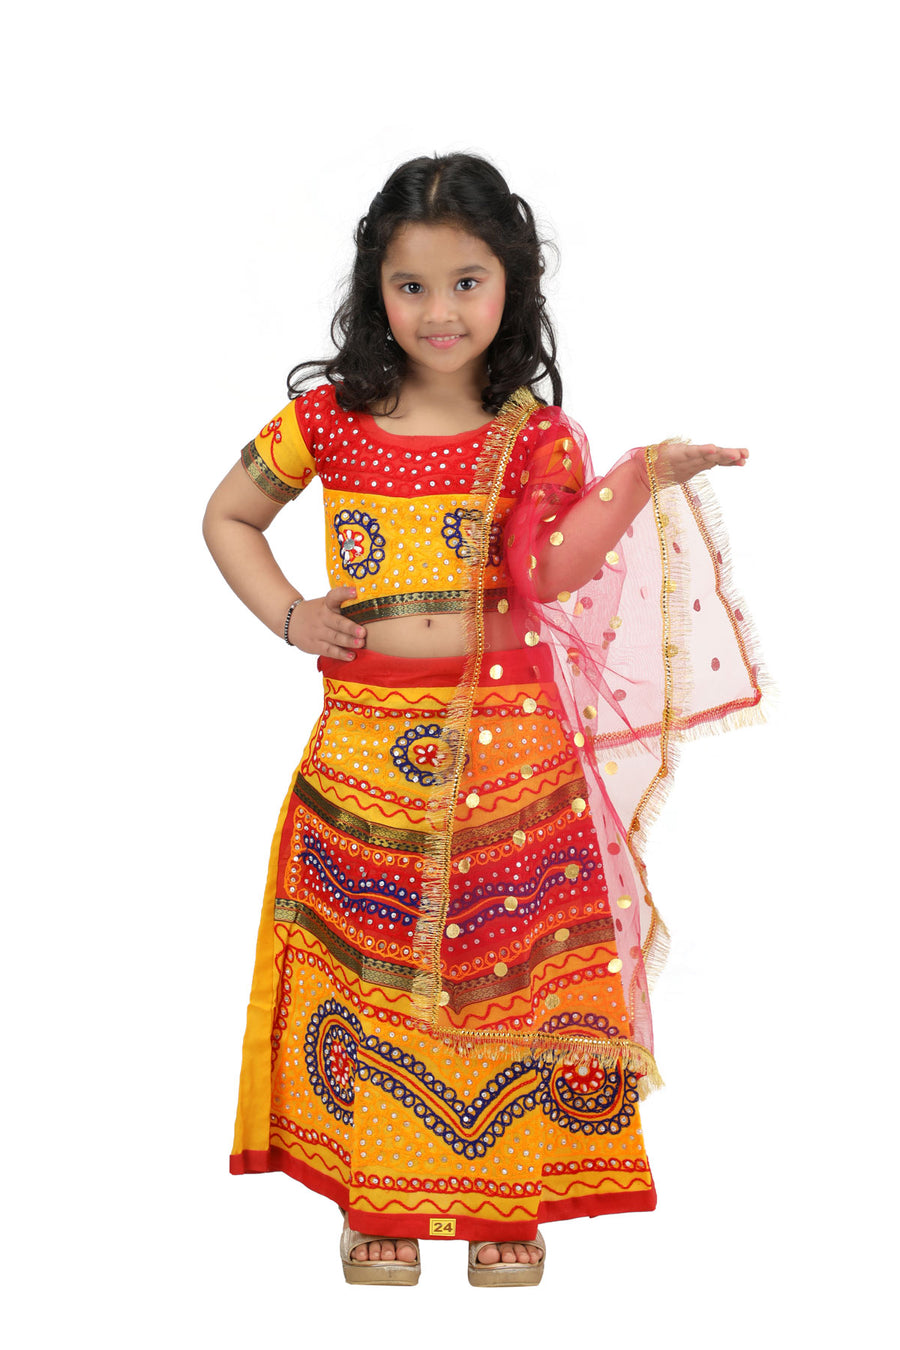 Baby Girl In Radha Costume Traditional Dress And She Holding Flute In Hand  Stock Photo - Download Image Now - iStock